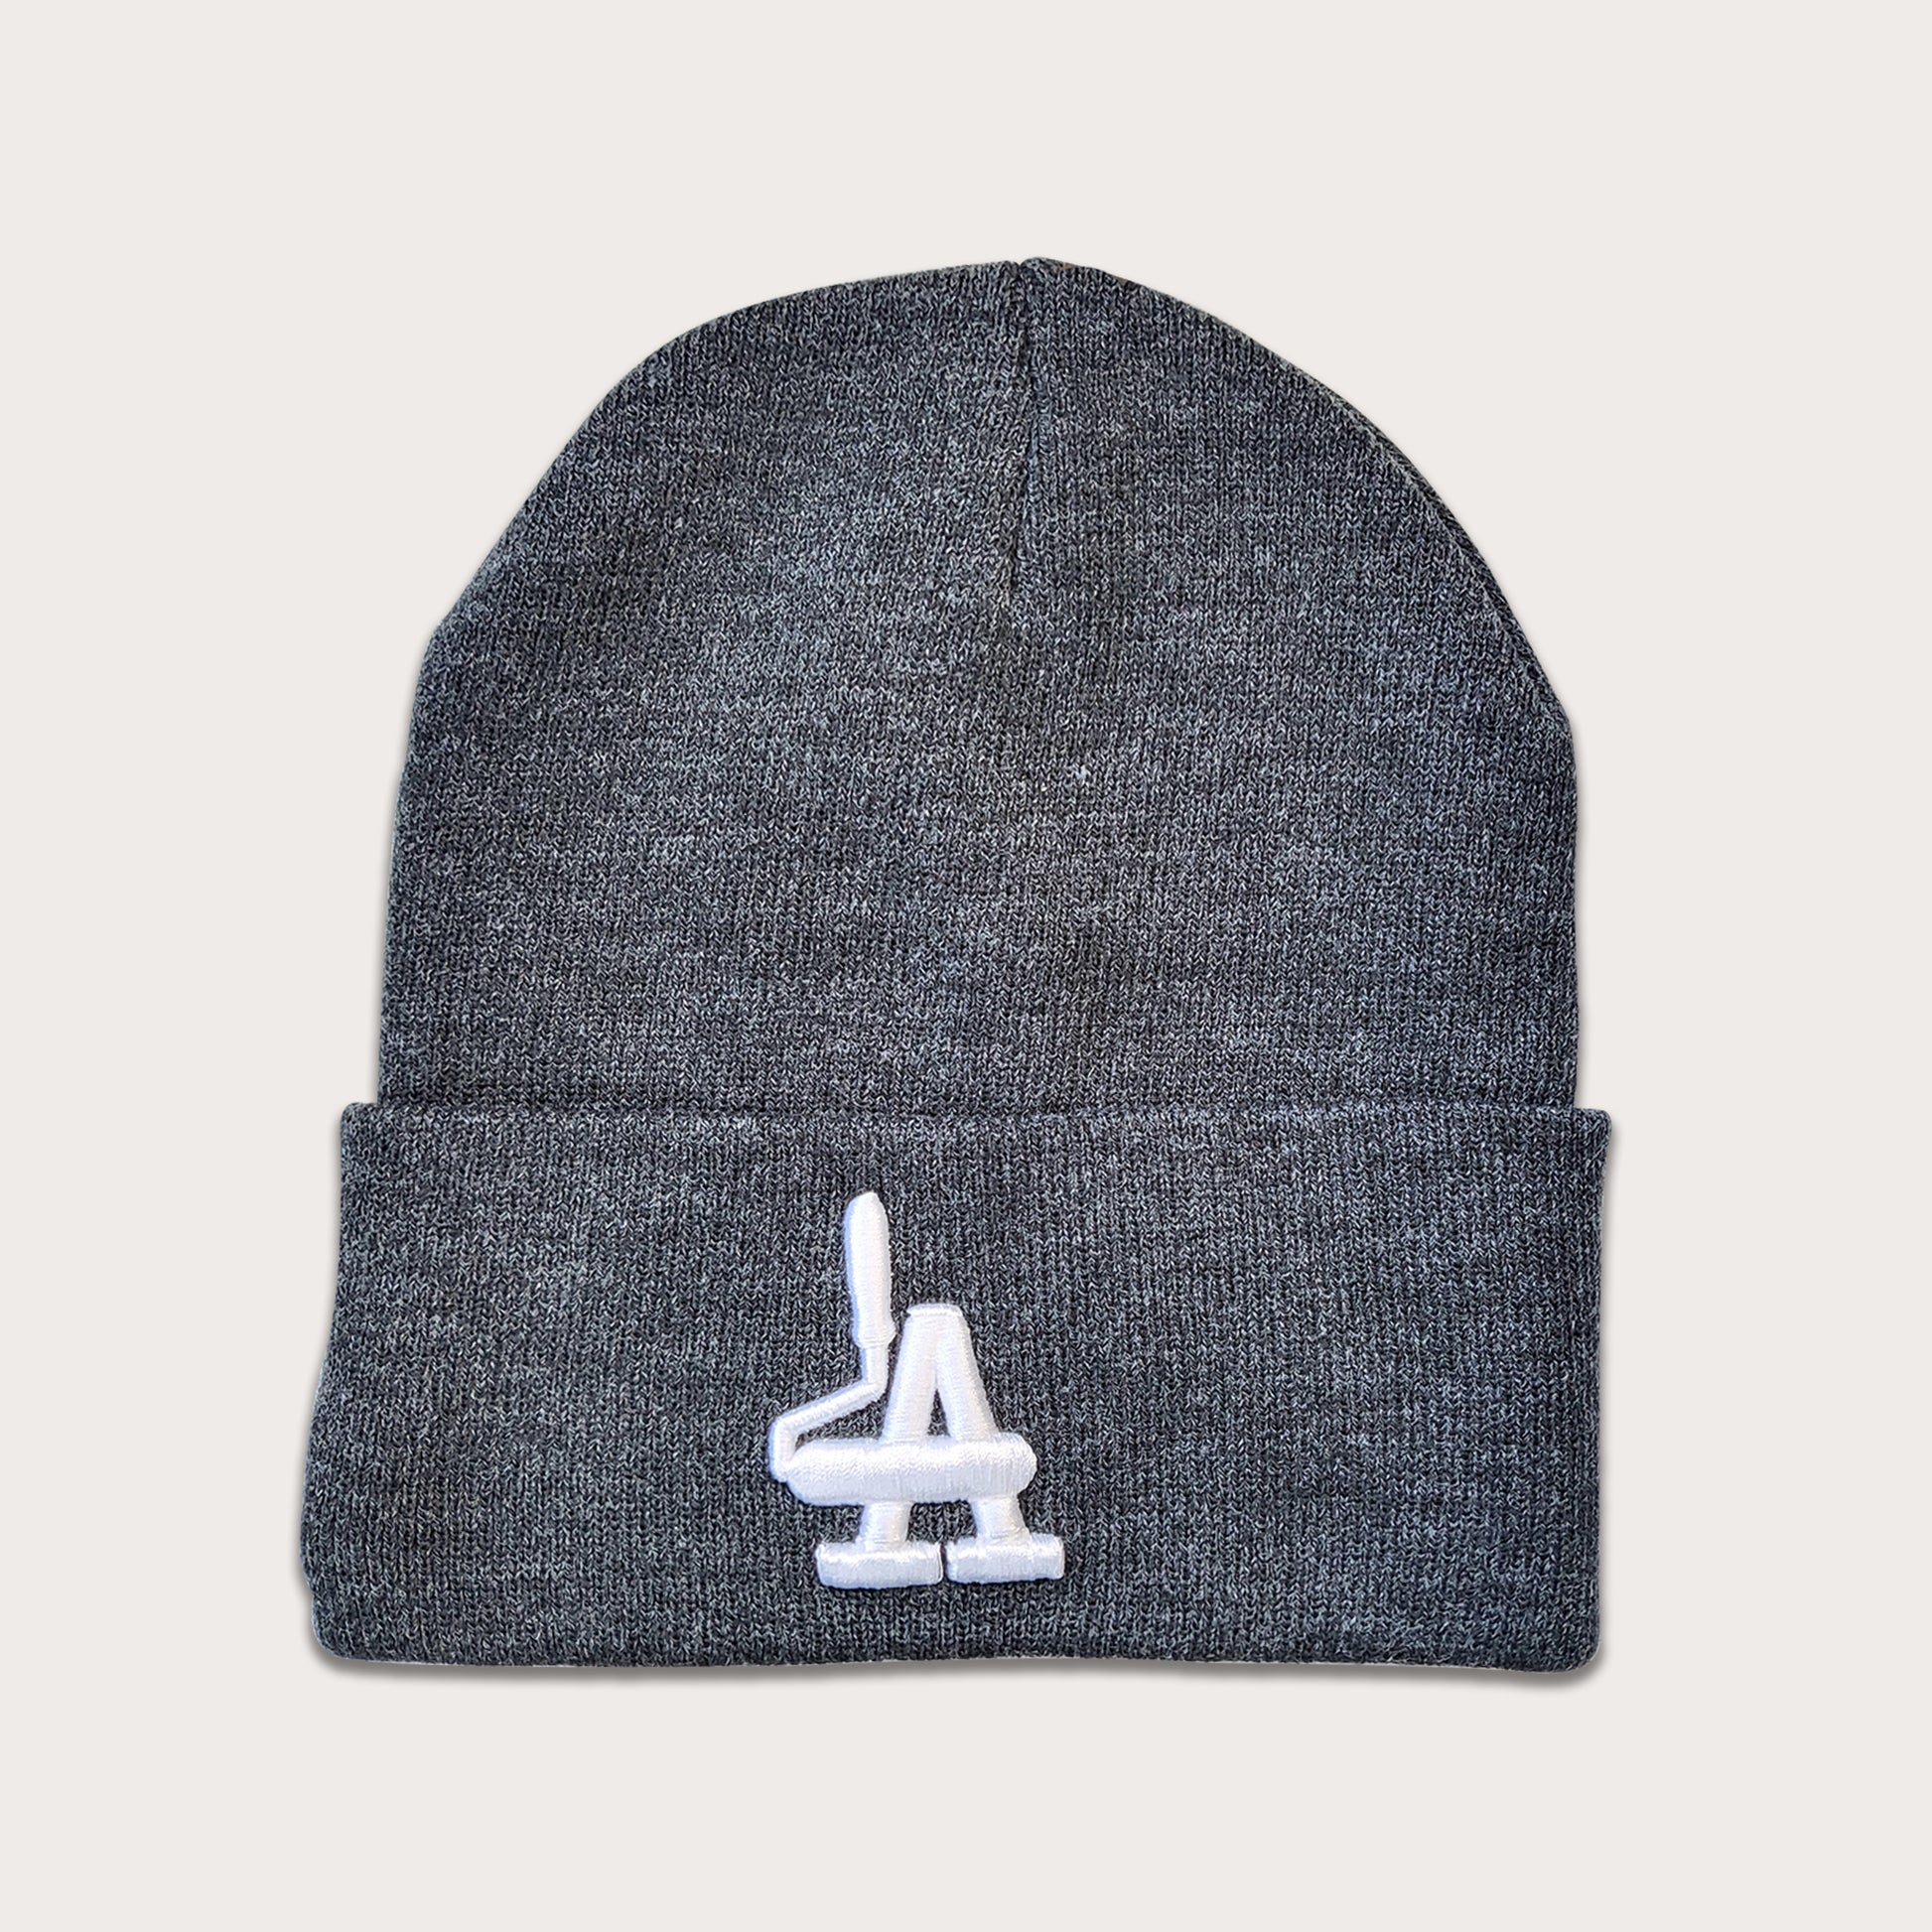 Locally owned graffiti brand Phatcaps, woven dark grey beanies with white puff embroidery.